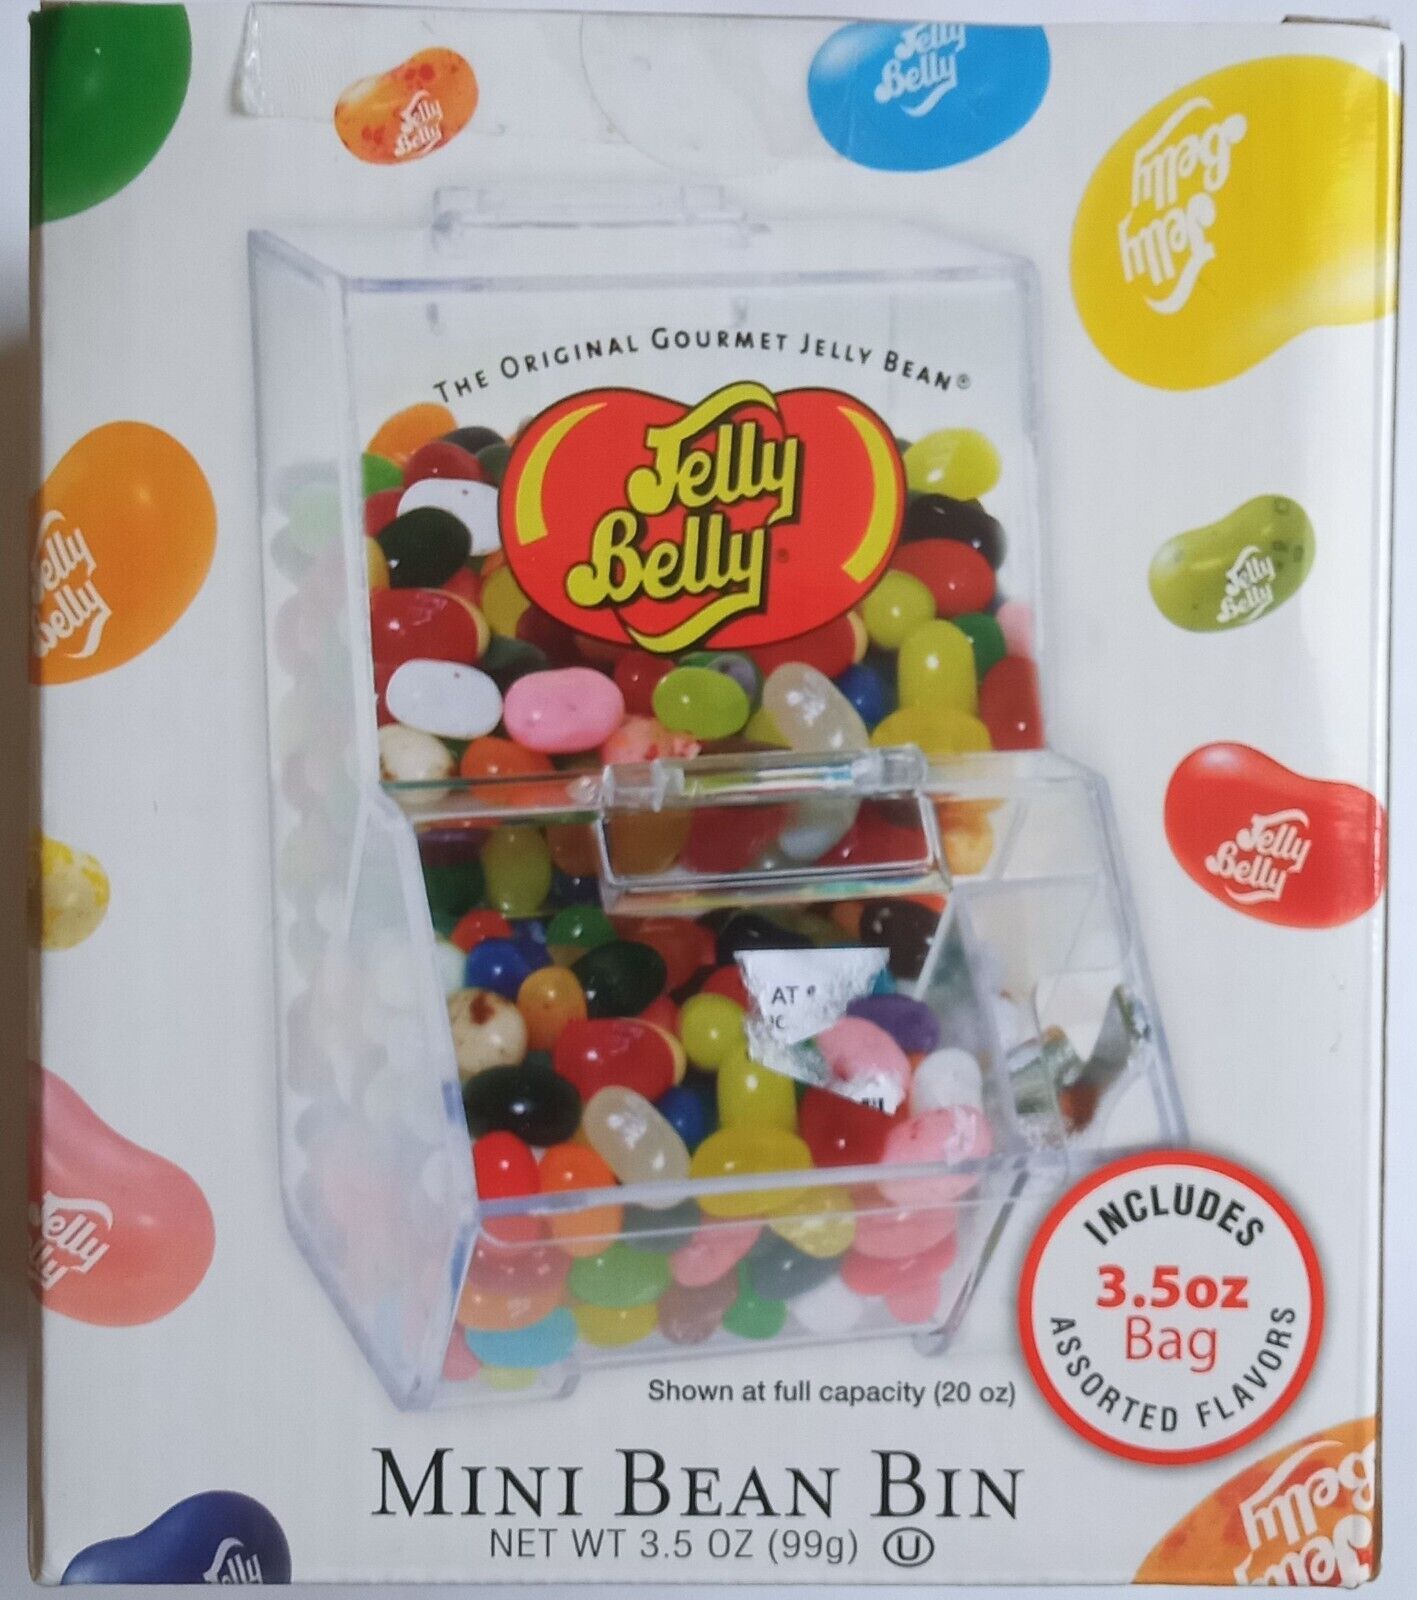 JELLY BELLY 20 OZ MINI BEAN BIN WITH 3.5 OZ JELLY BELLY BEAN BAG INCLUDED